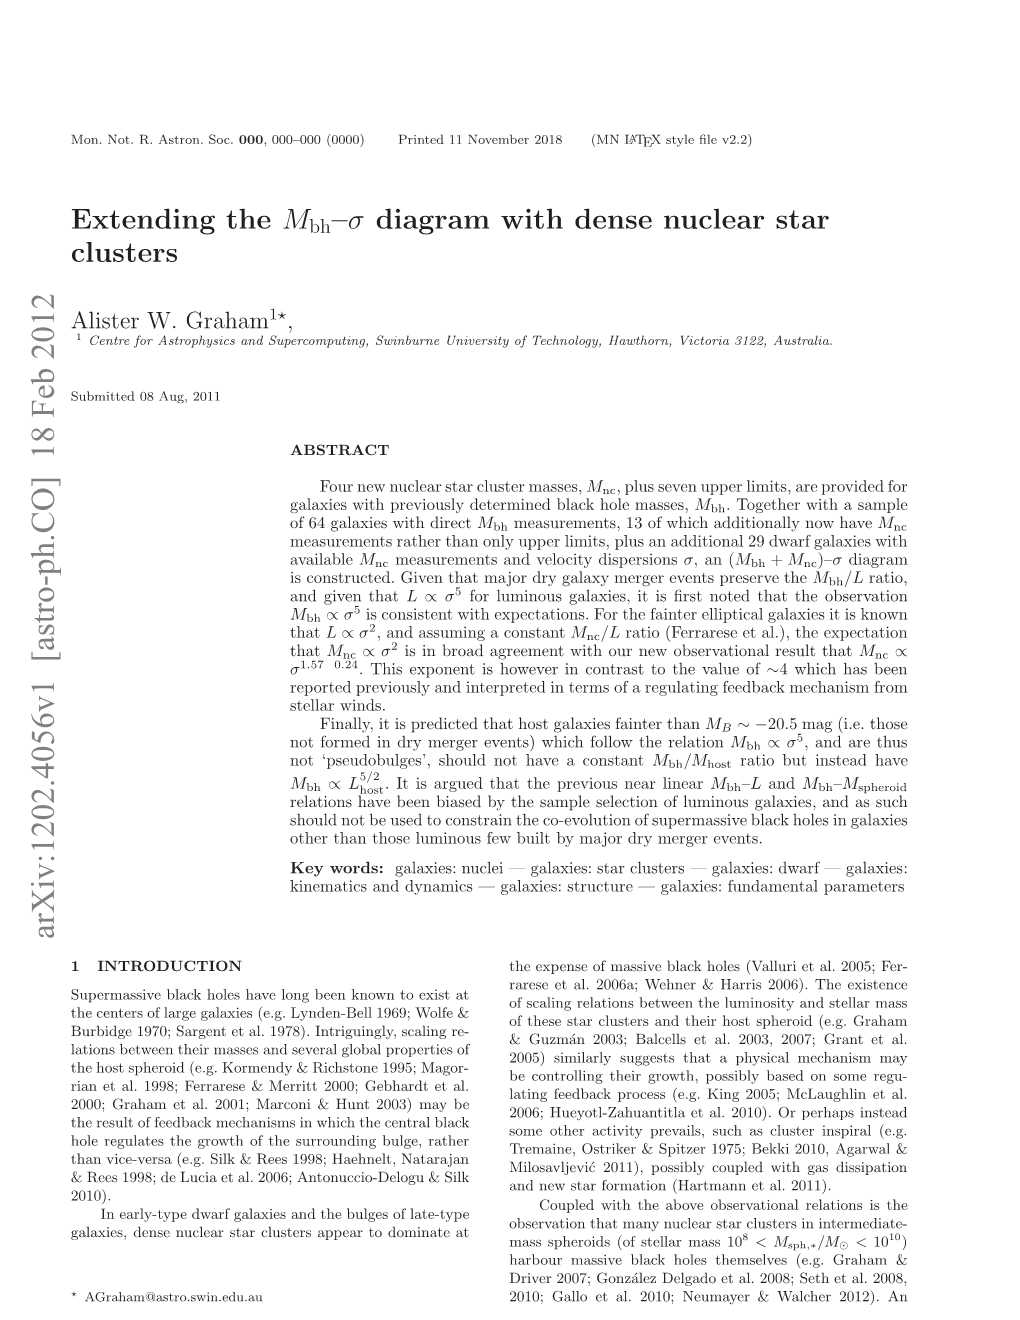 Extending the M (Bh)-Sigma Diagram with Dense Nuclear Star Clusters